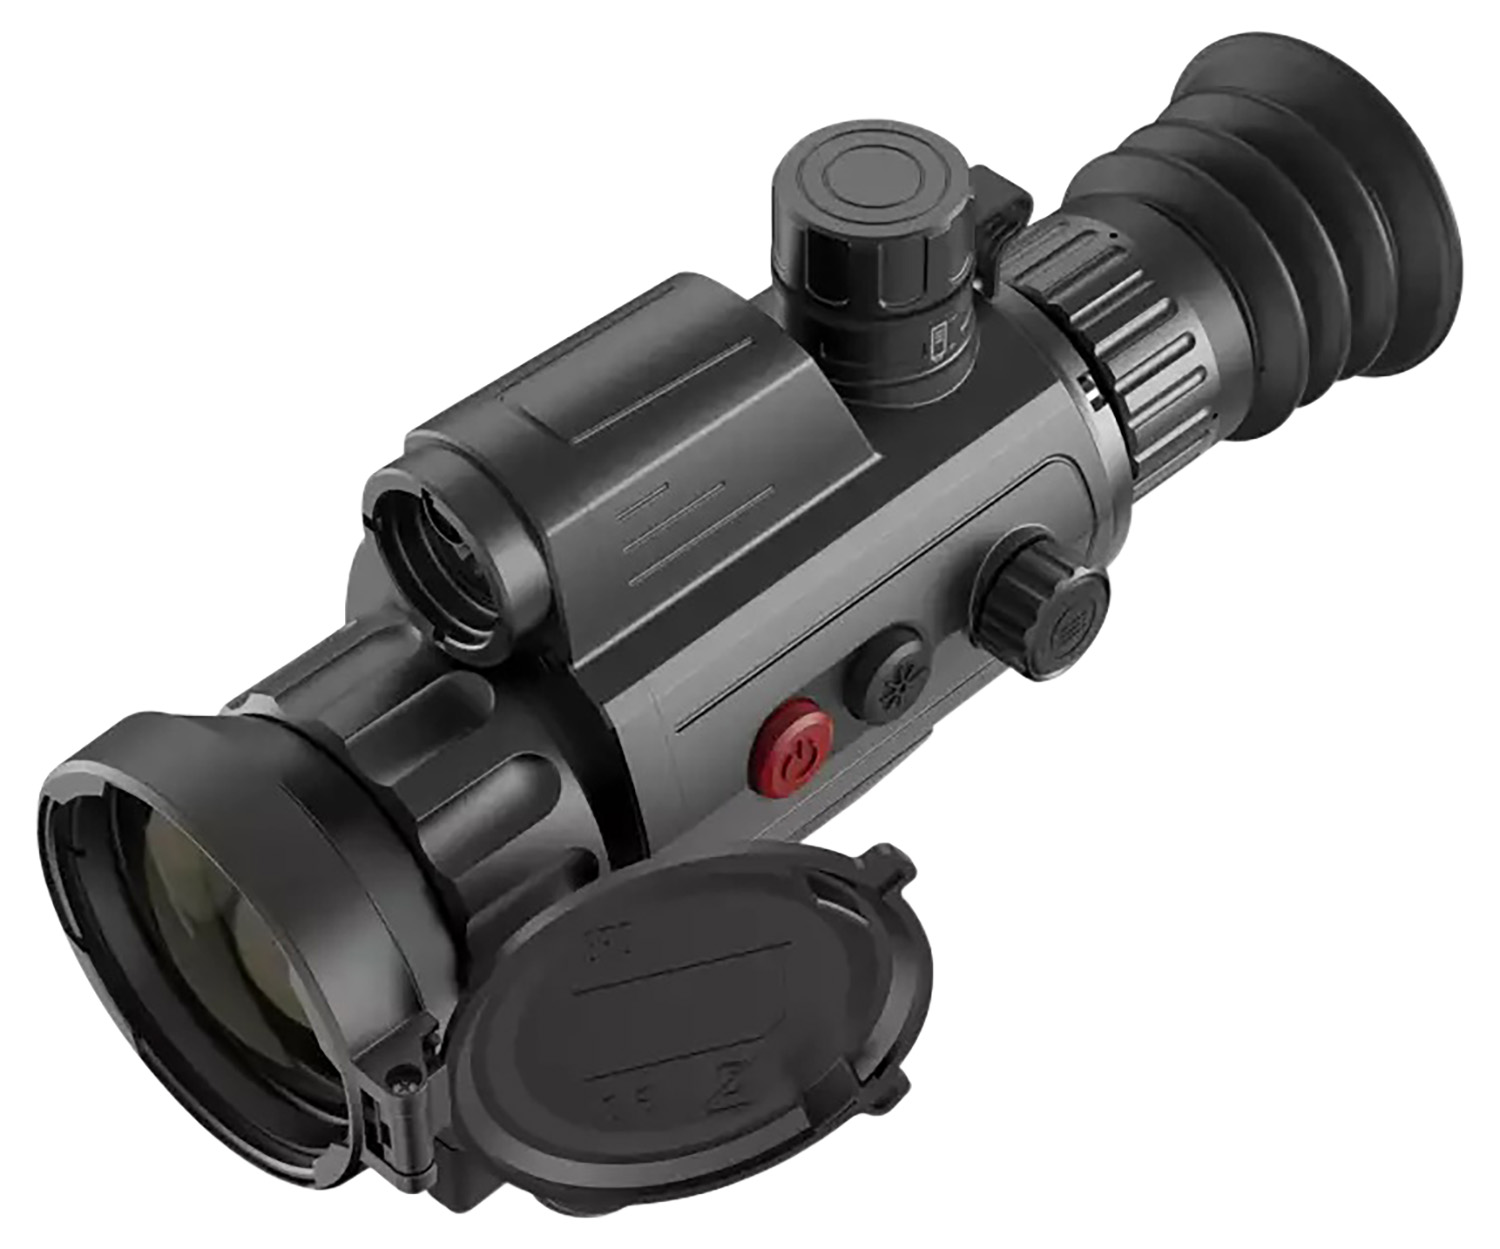 AGM Global Vision 3142555306Ra51 Varmint LRF TS50-640 Night Rifle Scope Black 2.5-20X 50mm Multi Reticle Features